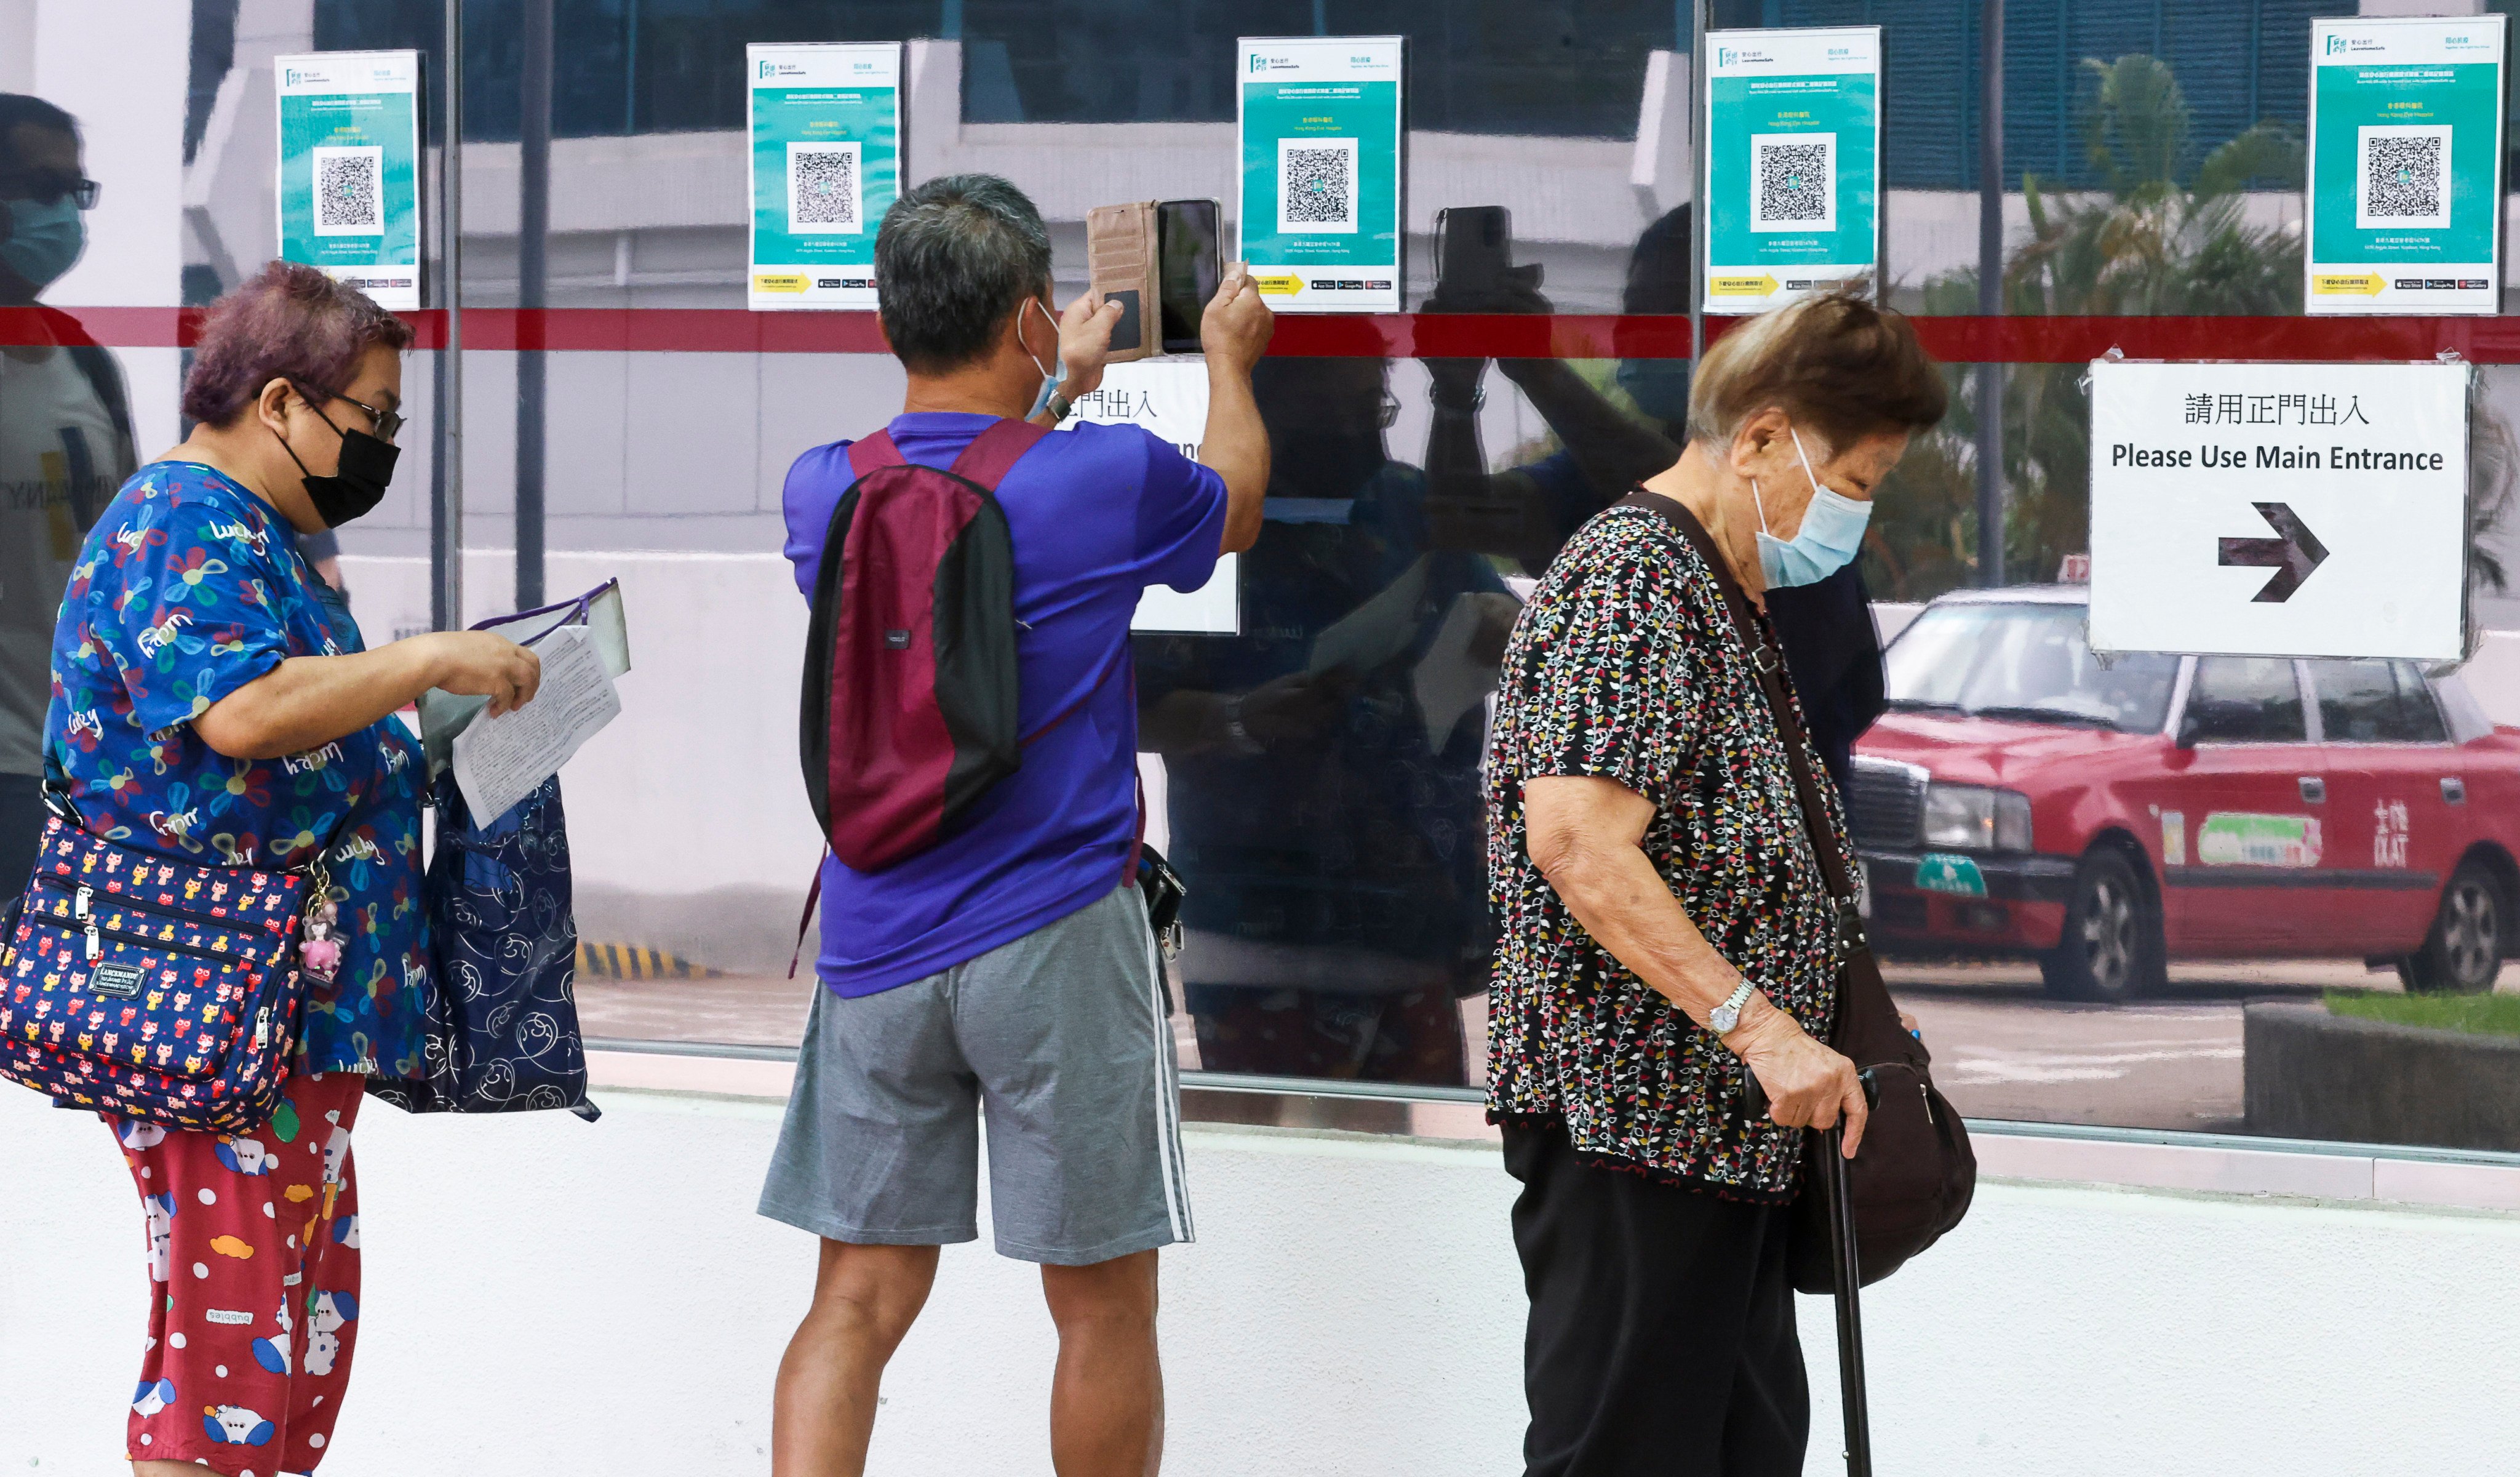 A man scans the QR code for the Covid-19 vaccine arrangements, at the Hong Kong Eye Hospital in Kowloon City, on June 13, 2022. Photo: K. Y. Cheng